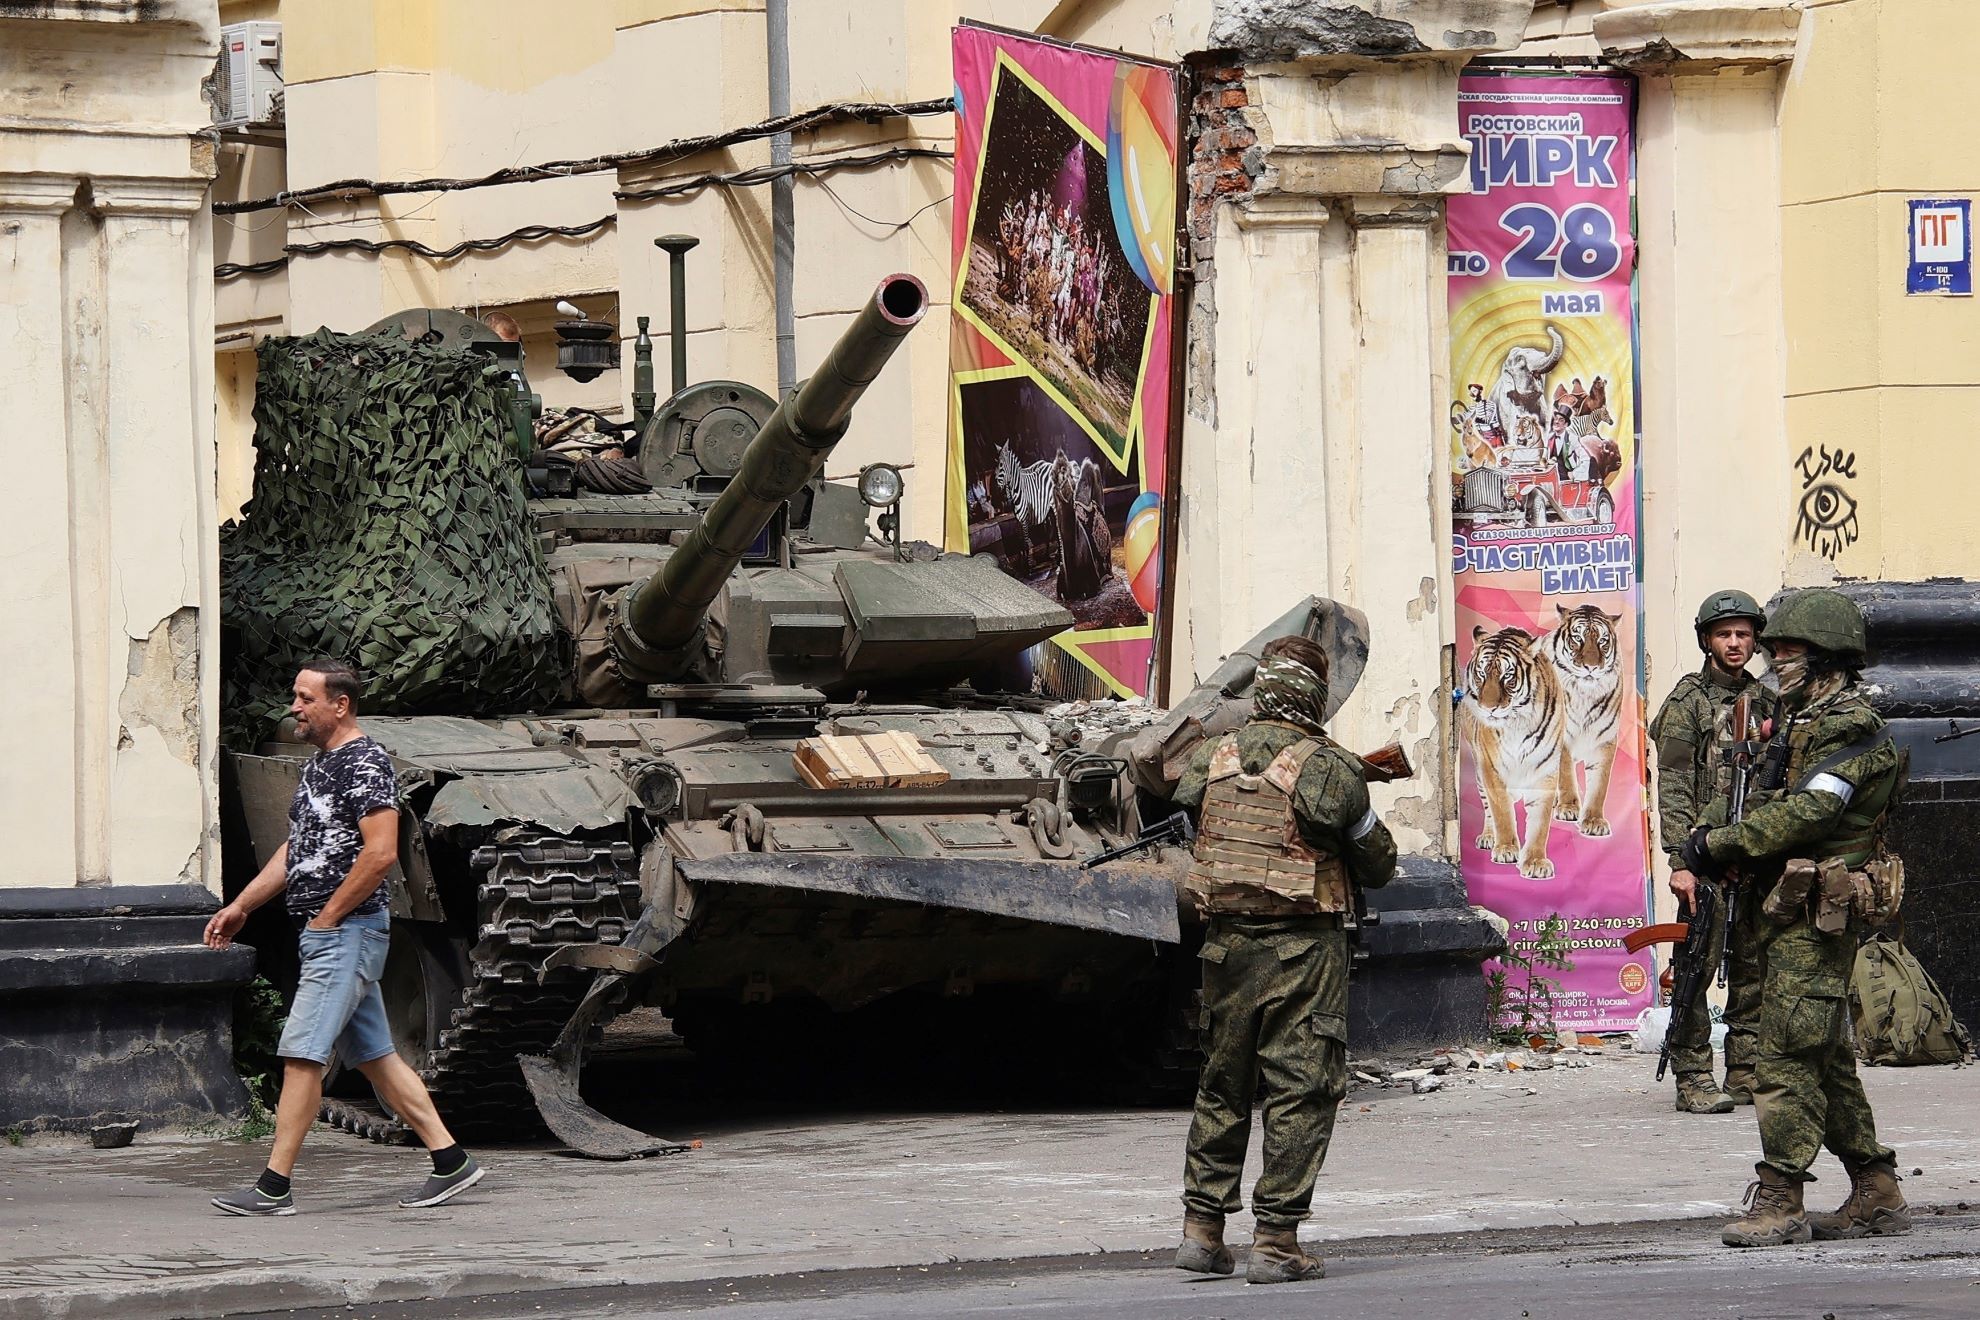 Russian servicemen guard an area standing in front of a tank in a street in Rostov-on-Don.